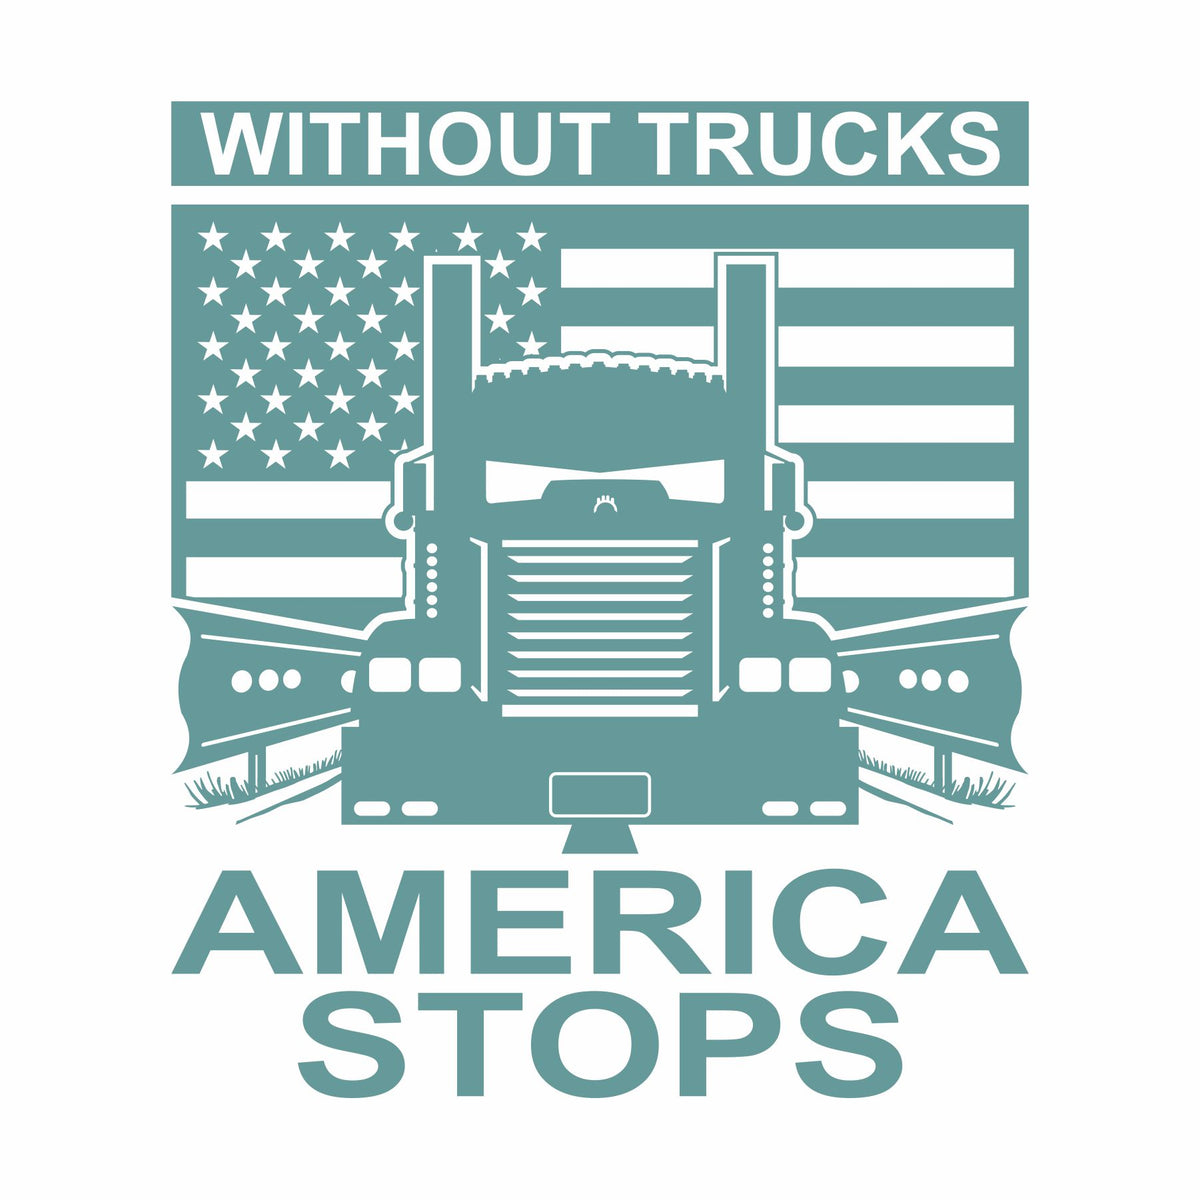 Without Trucks America Stops - KW- Vinyl Decal - Free Shipping